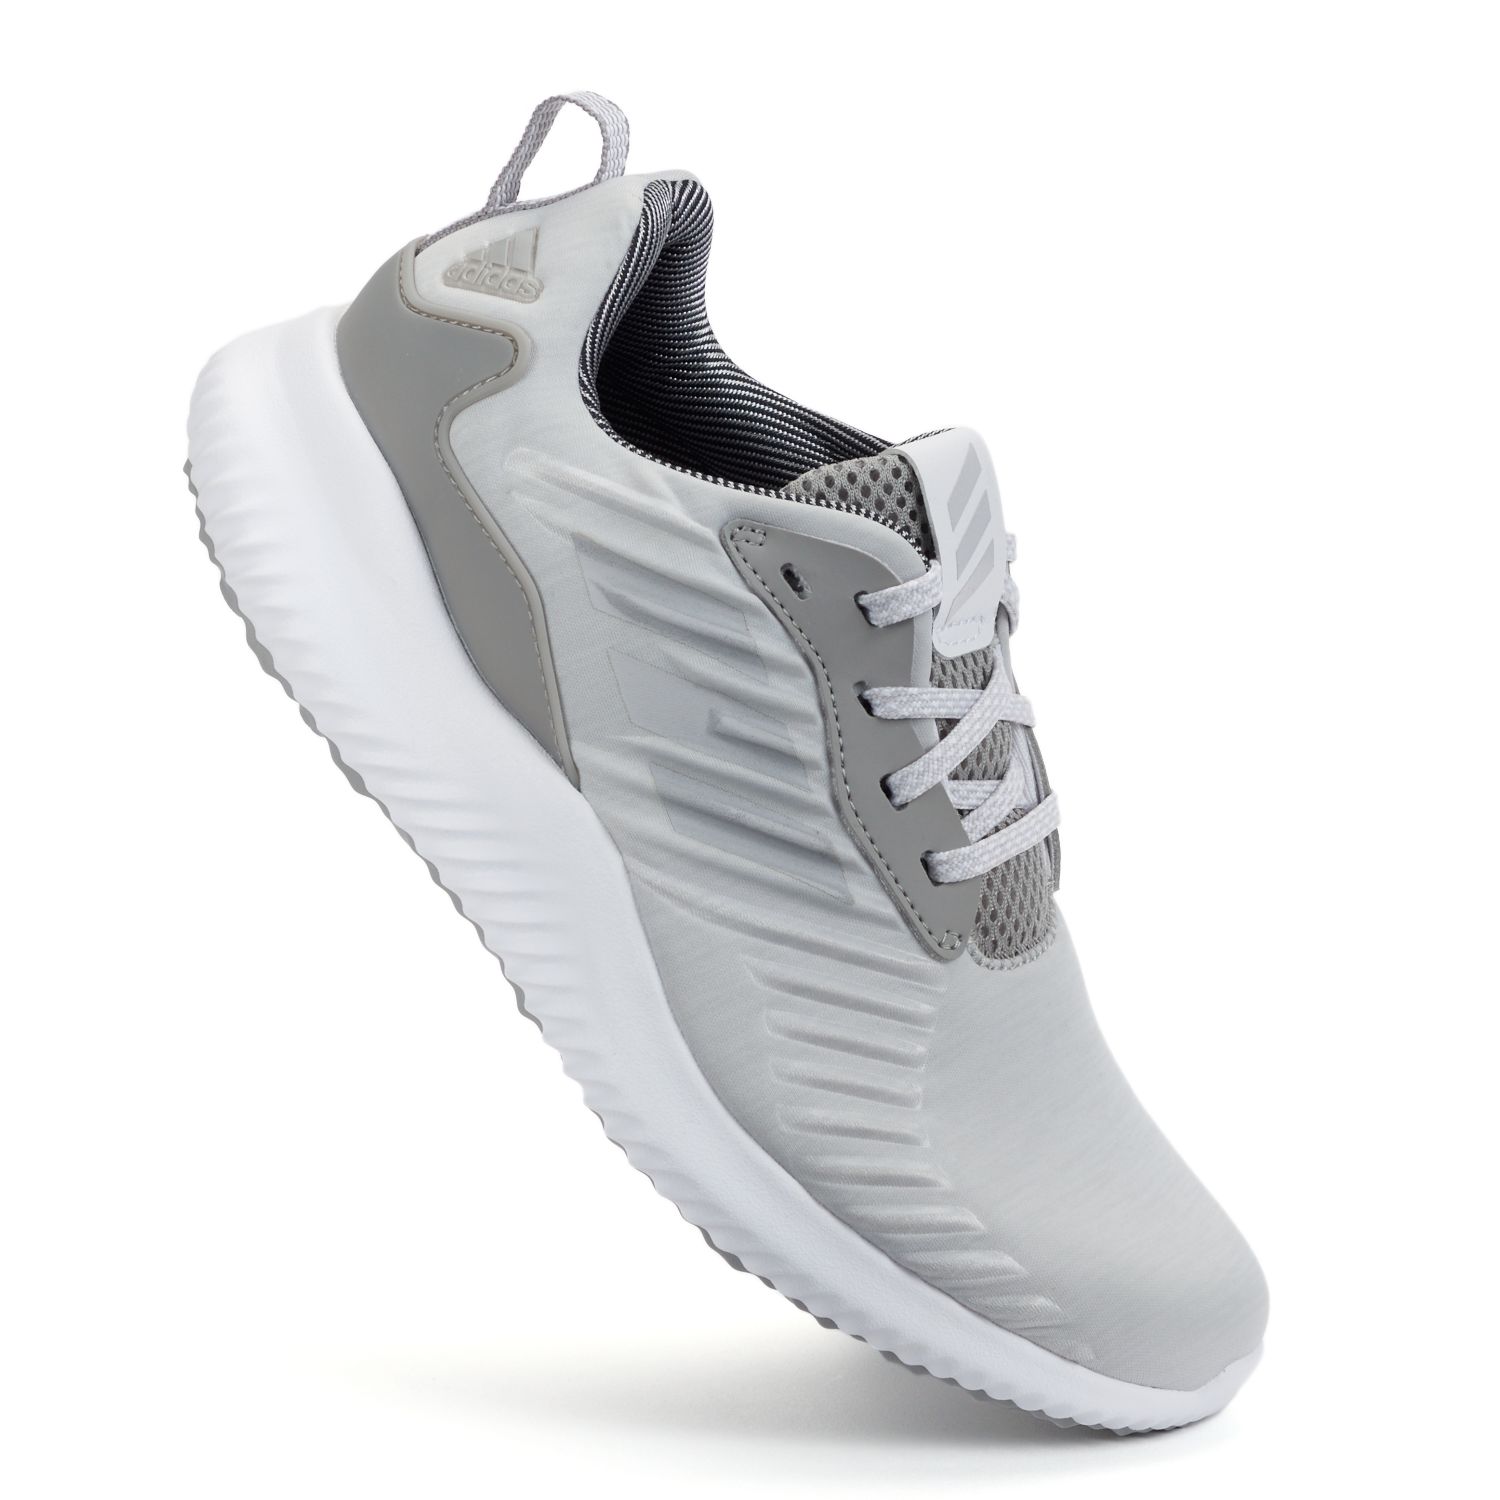 adidas alphabounce rc women's running shoes